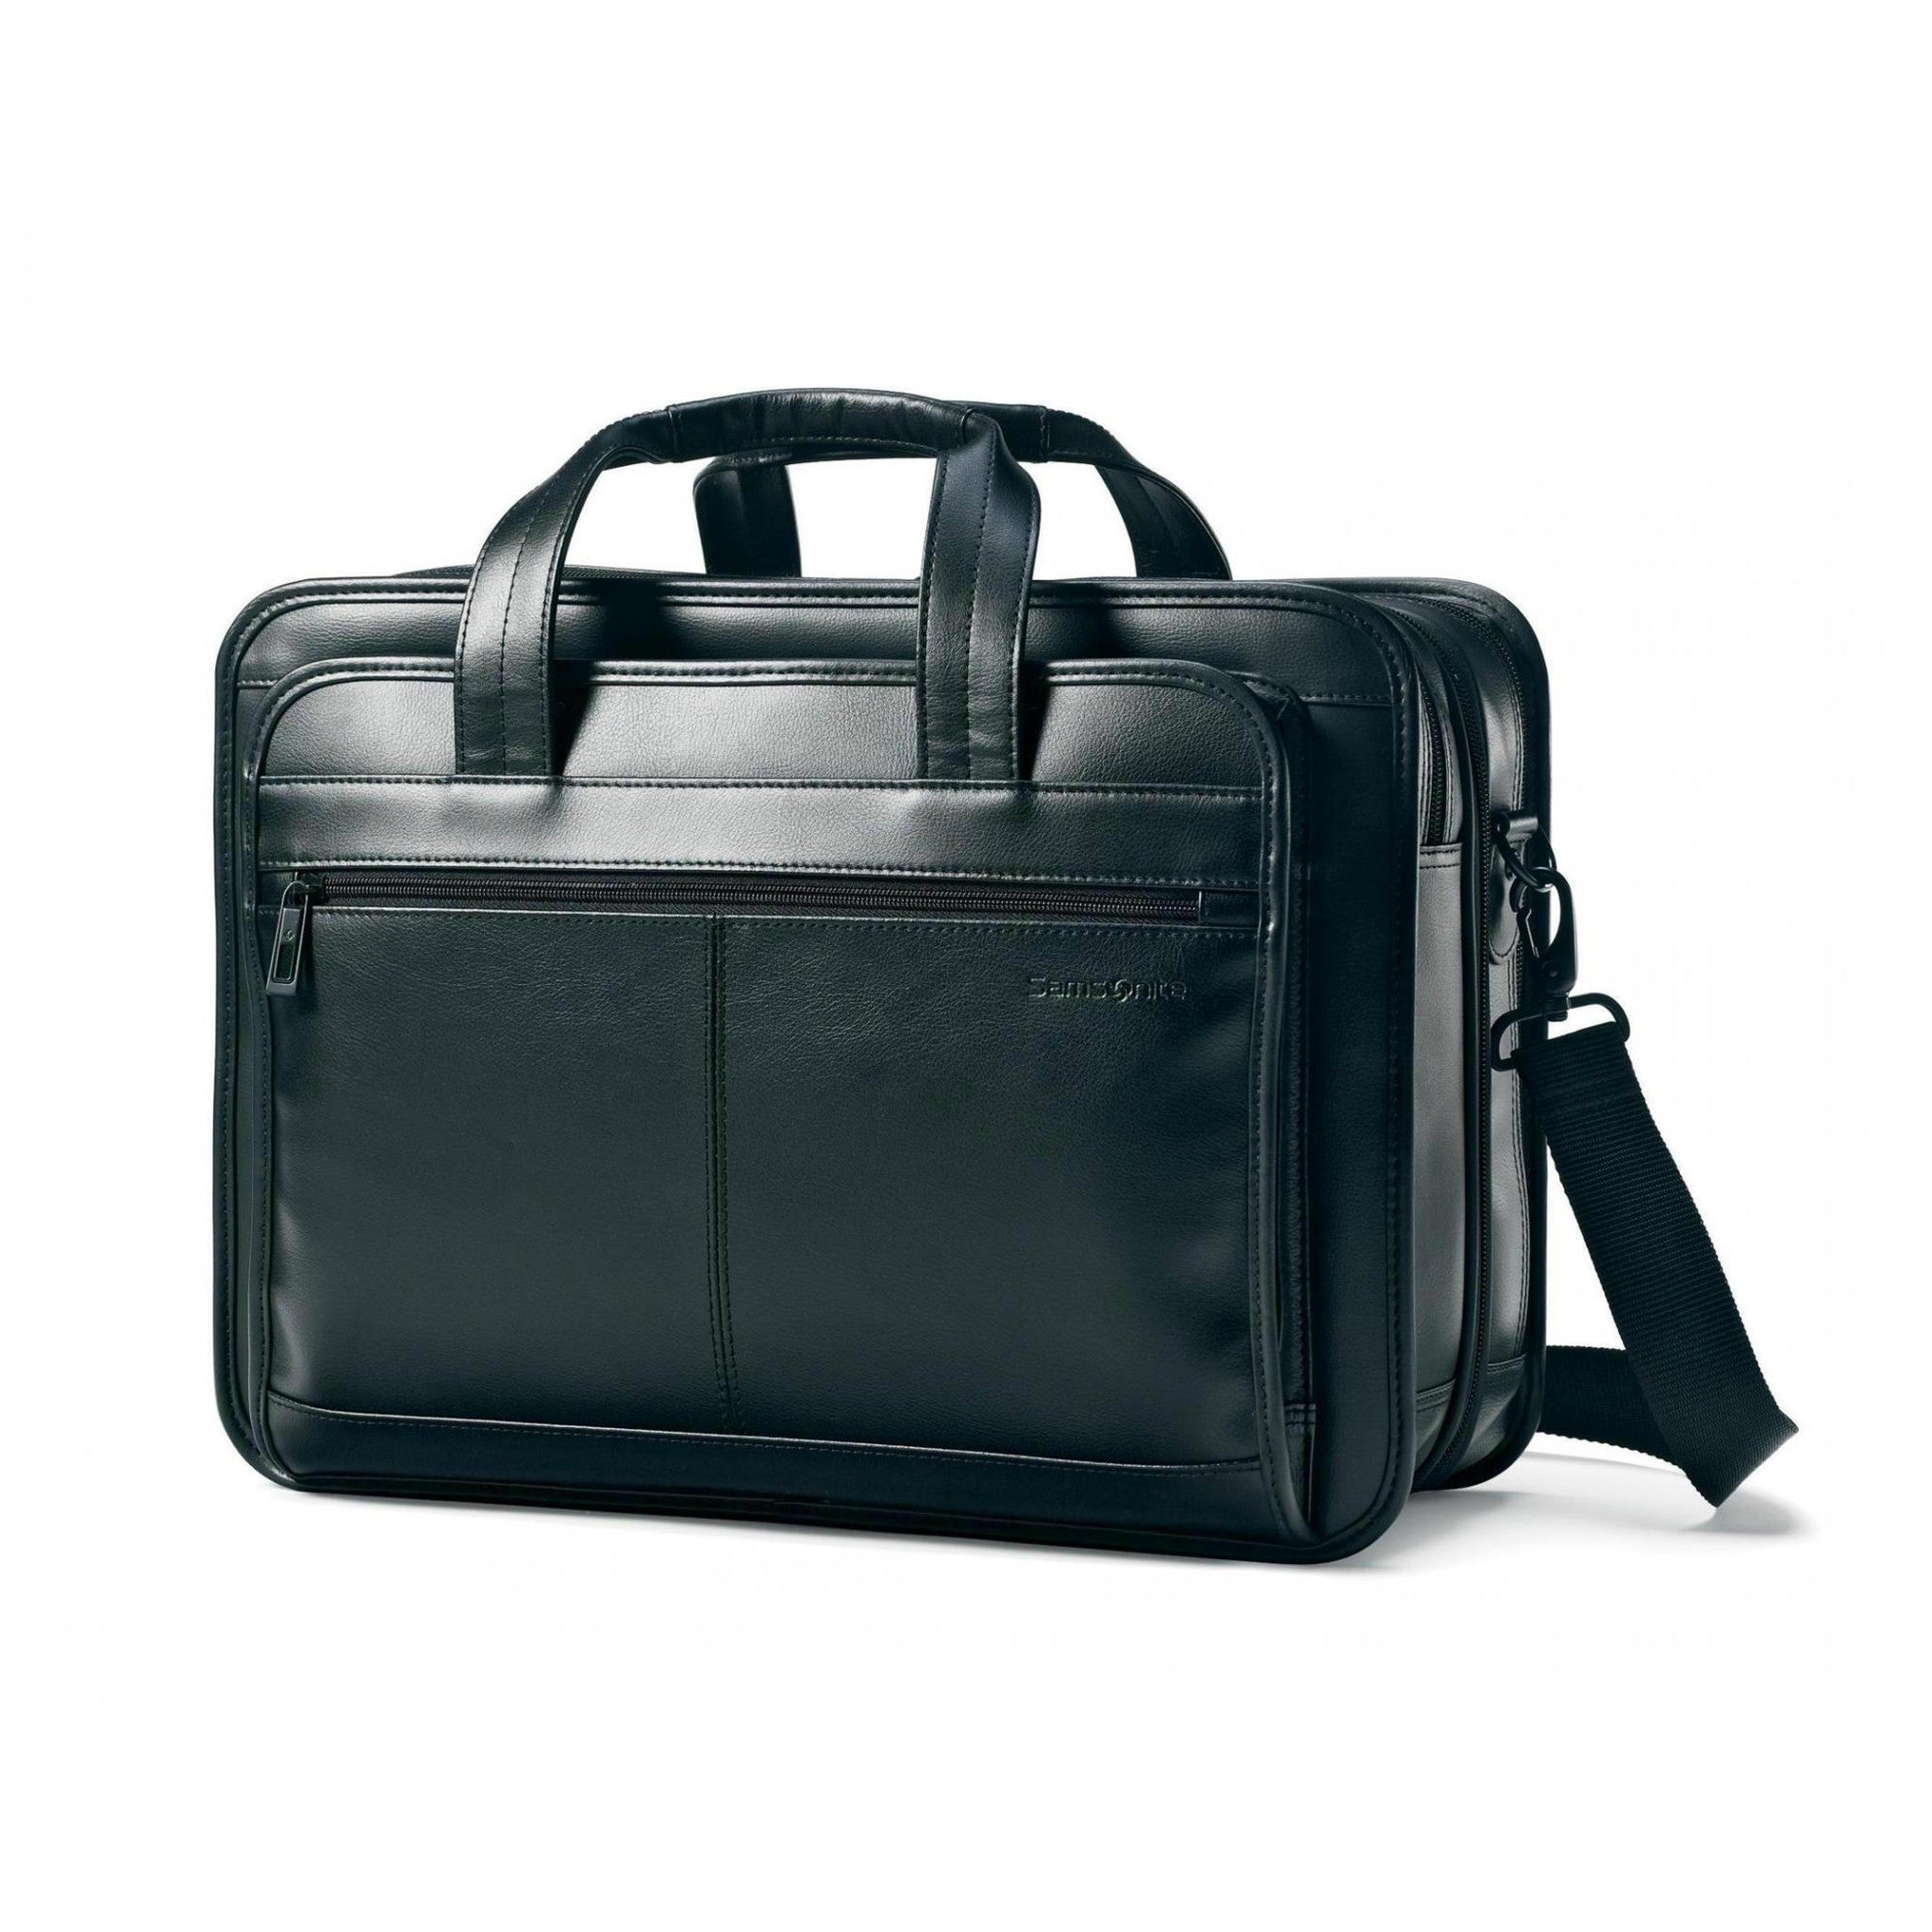 Leather Office Bag -  UK